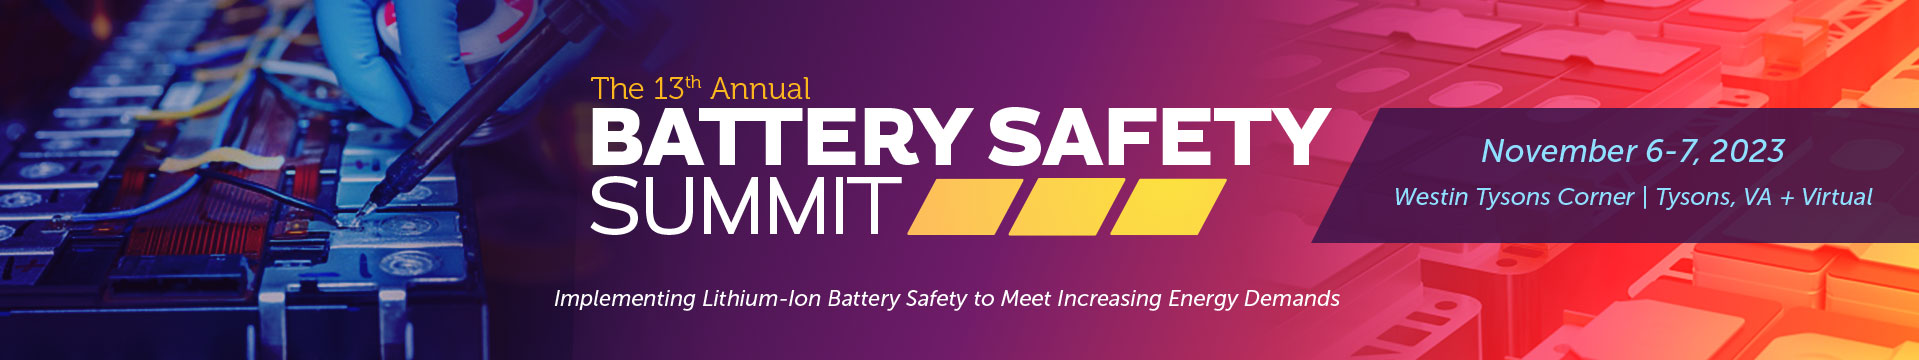 The Battery Safety Summit 2023, Falls Church City, Virginia, United States